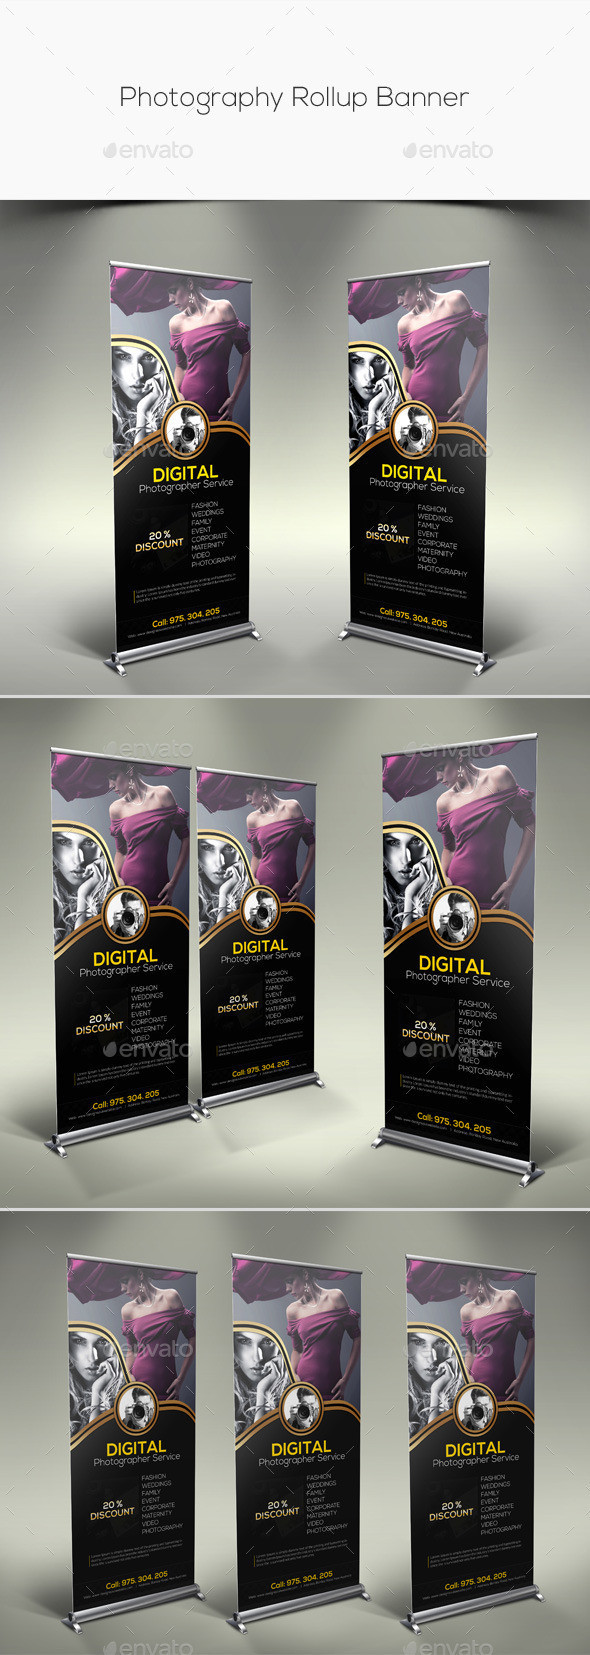 Photography rollup banner preview